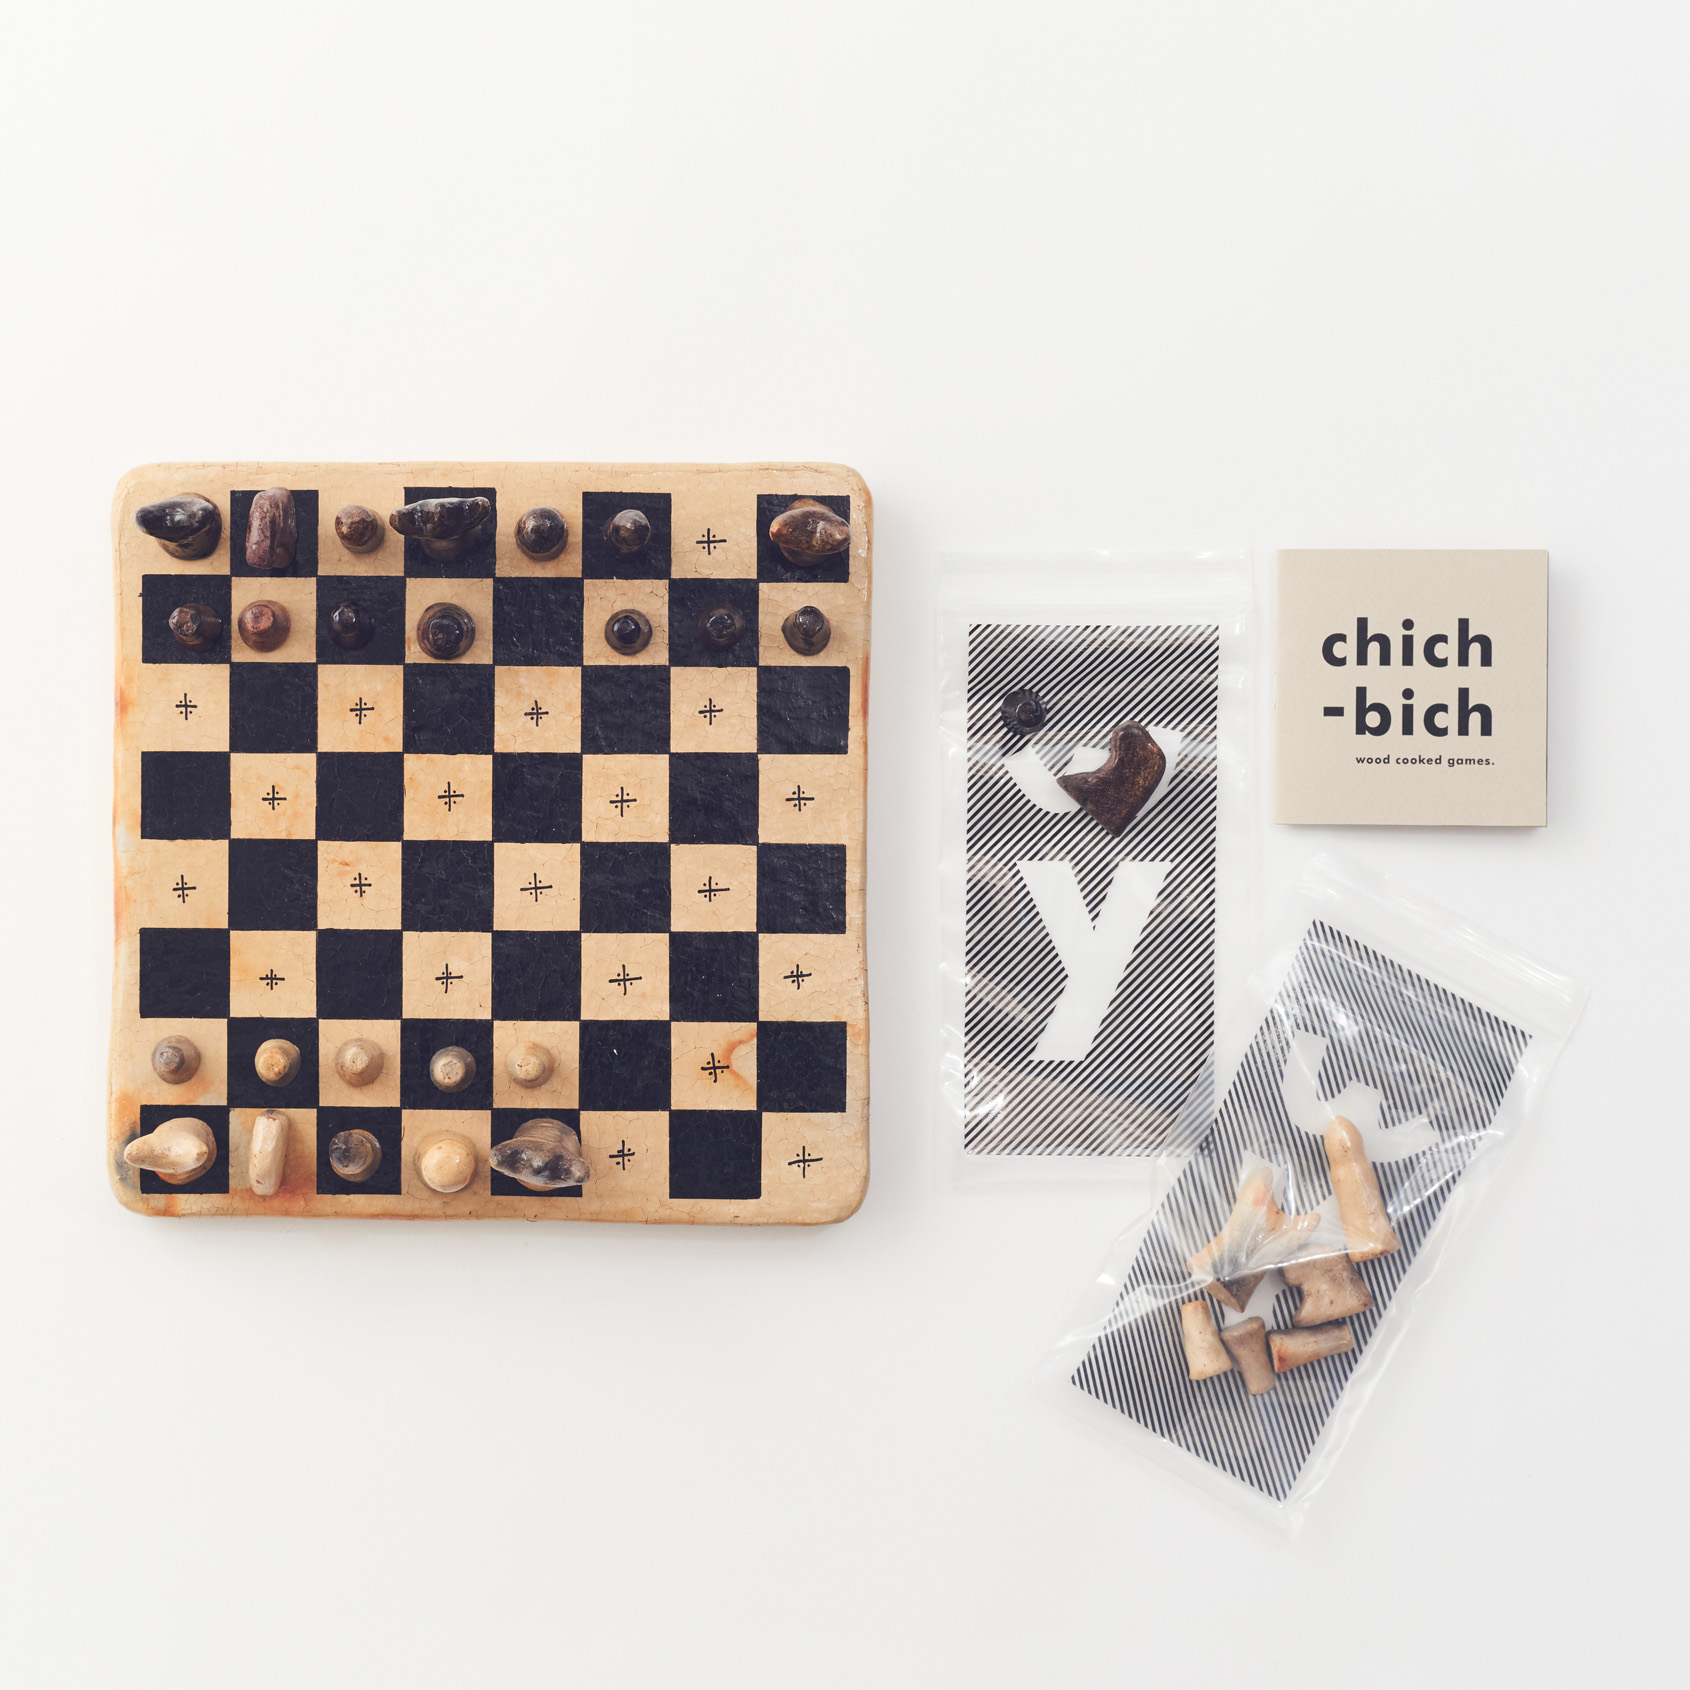 Sntieecr 81 PCS Chess Board Resin Molds Kits with Tunisia